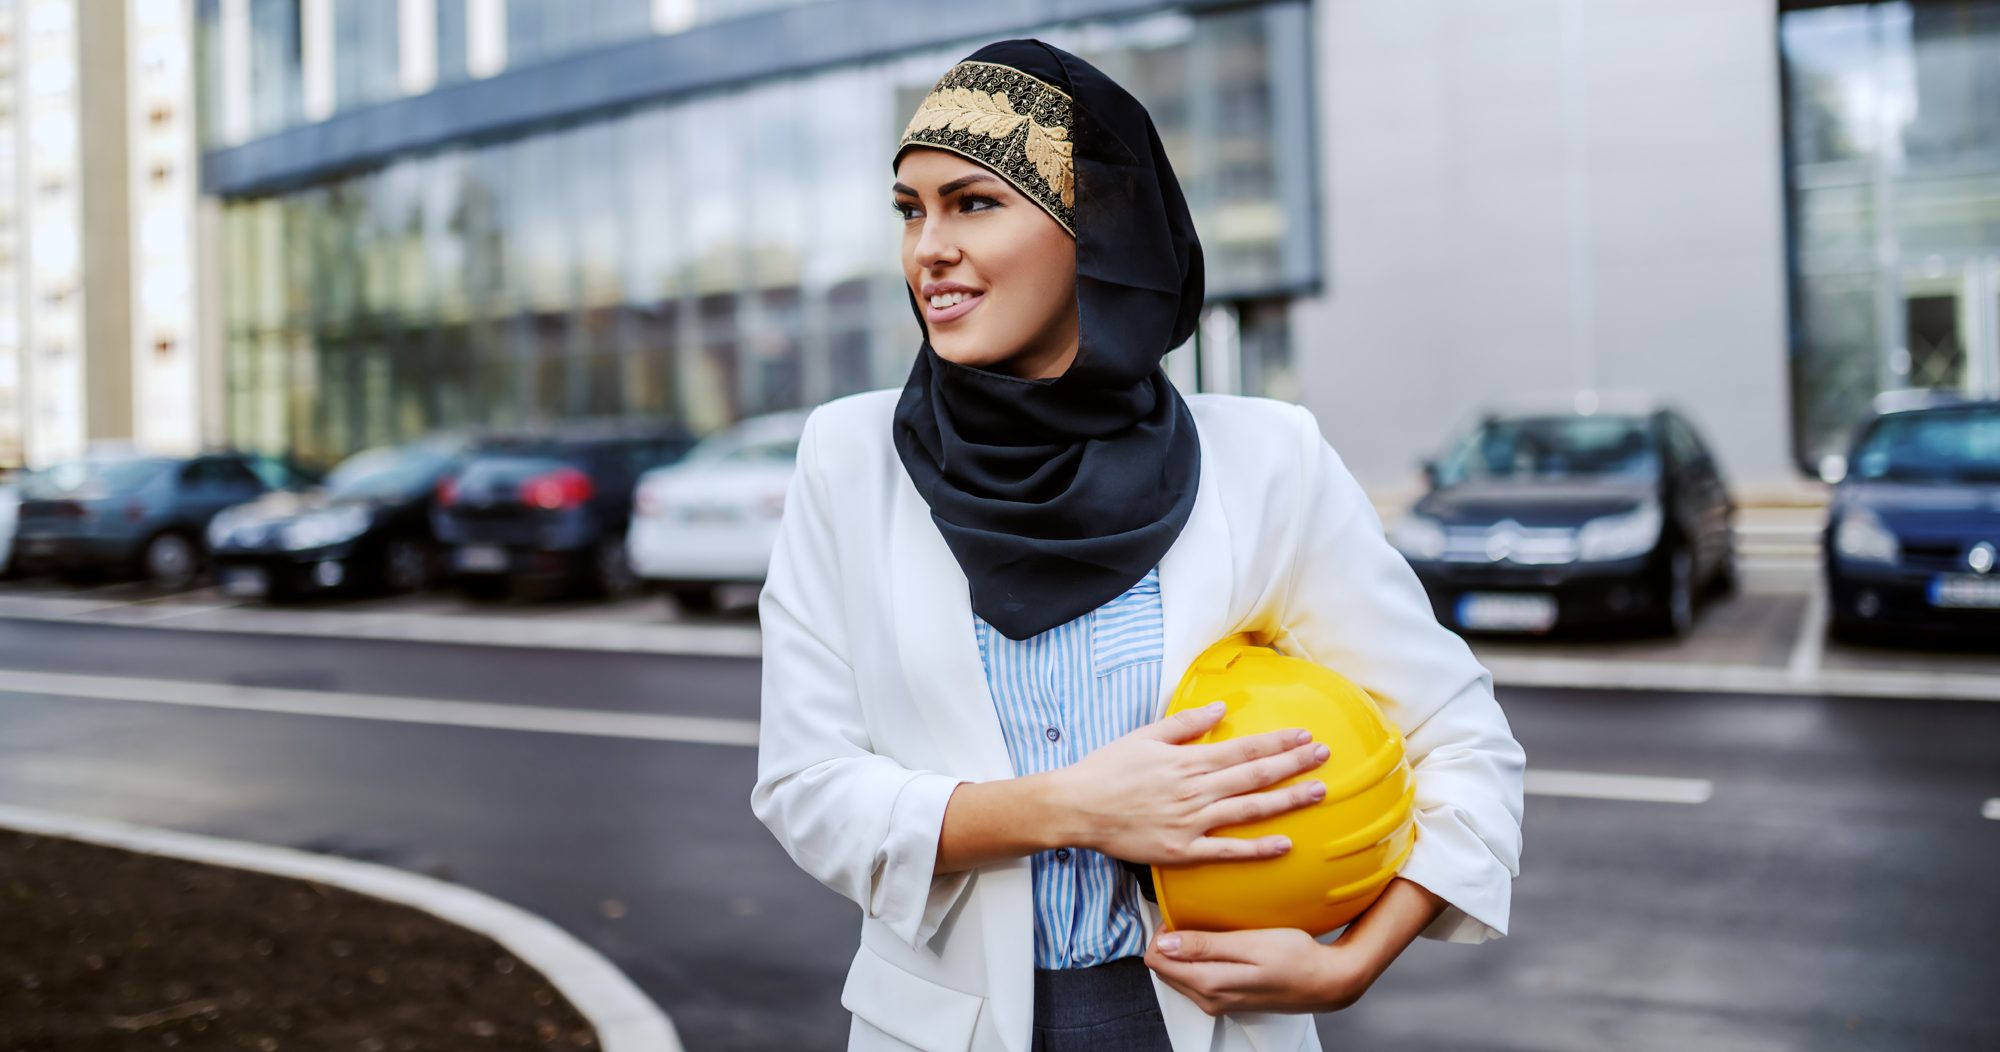 Arabic Young Woman With Hardhat Being Carried Aspect Ratio 760 400